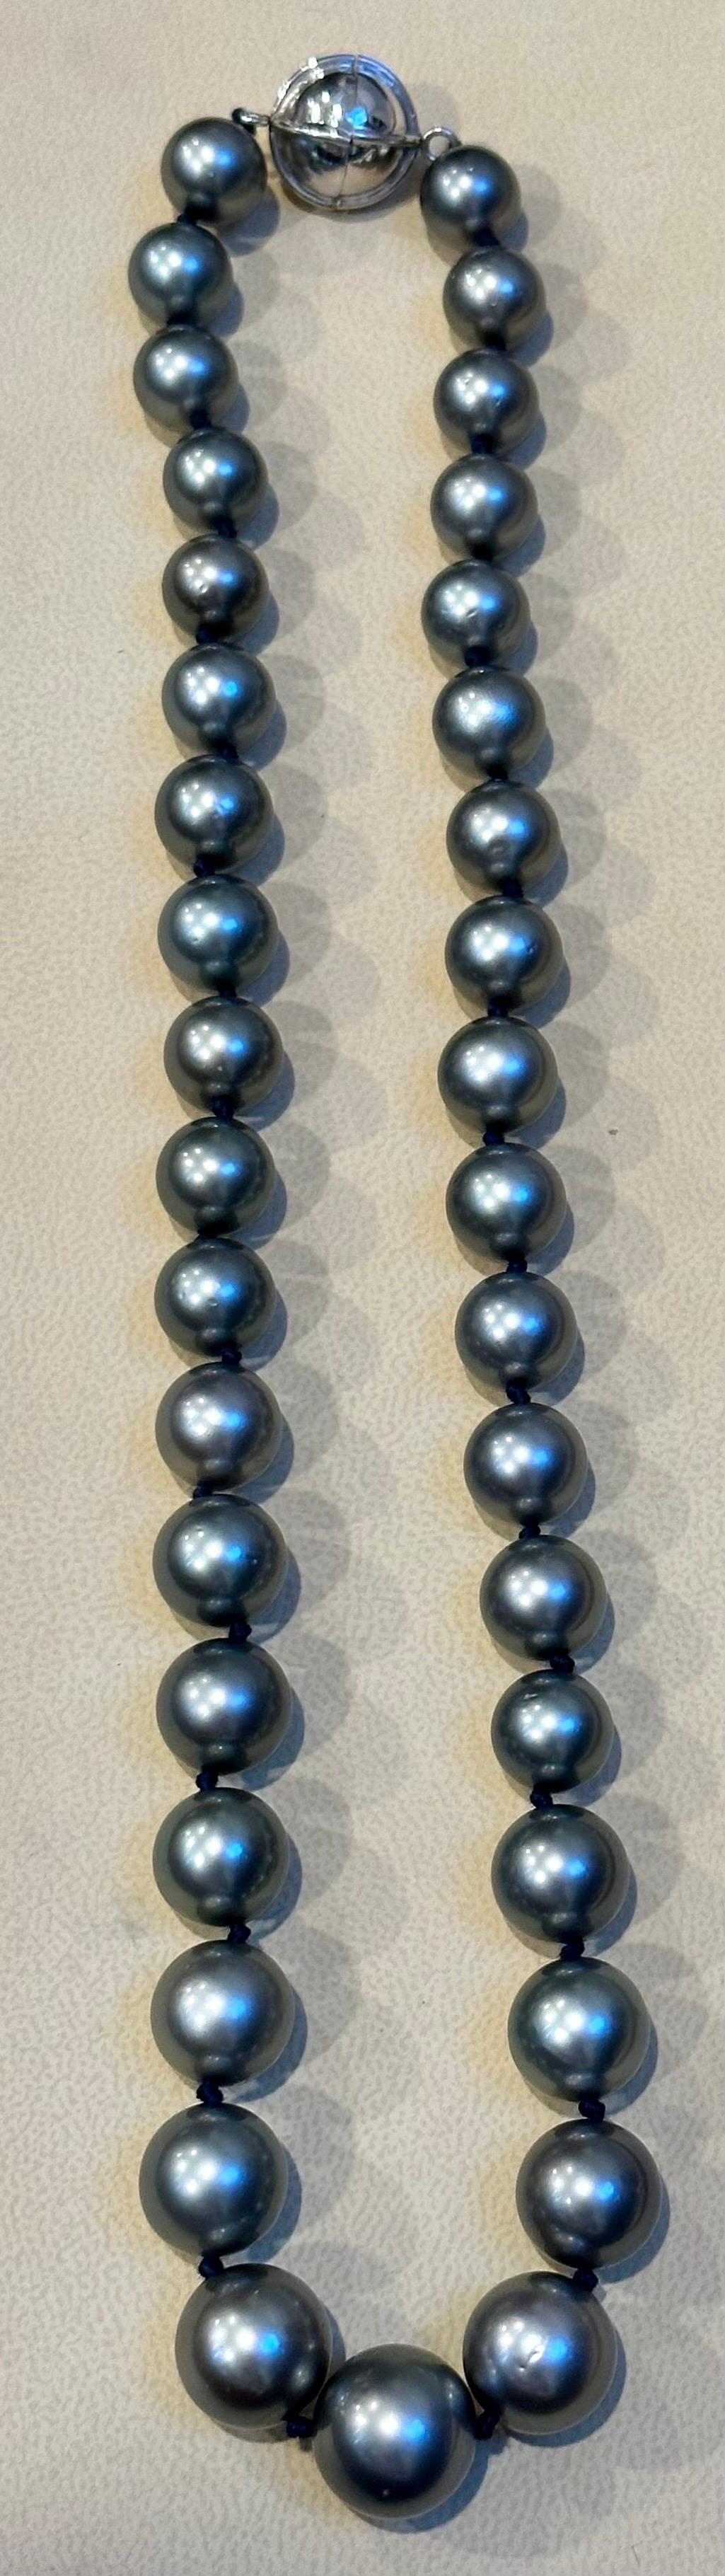 11-15 mm Tahitian Black Graduating Pearls Strand Necklace, Estate, WG For Sale 4